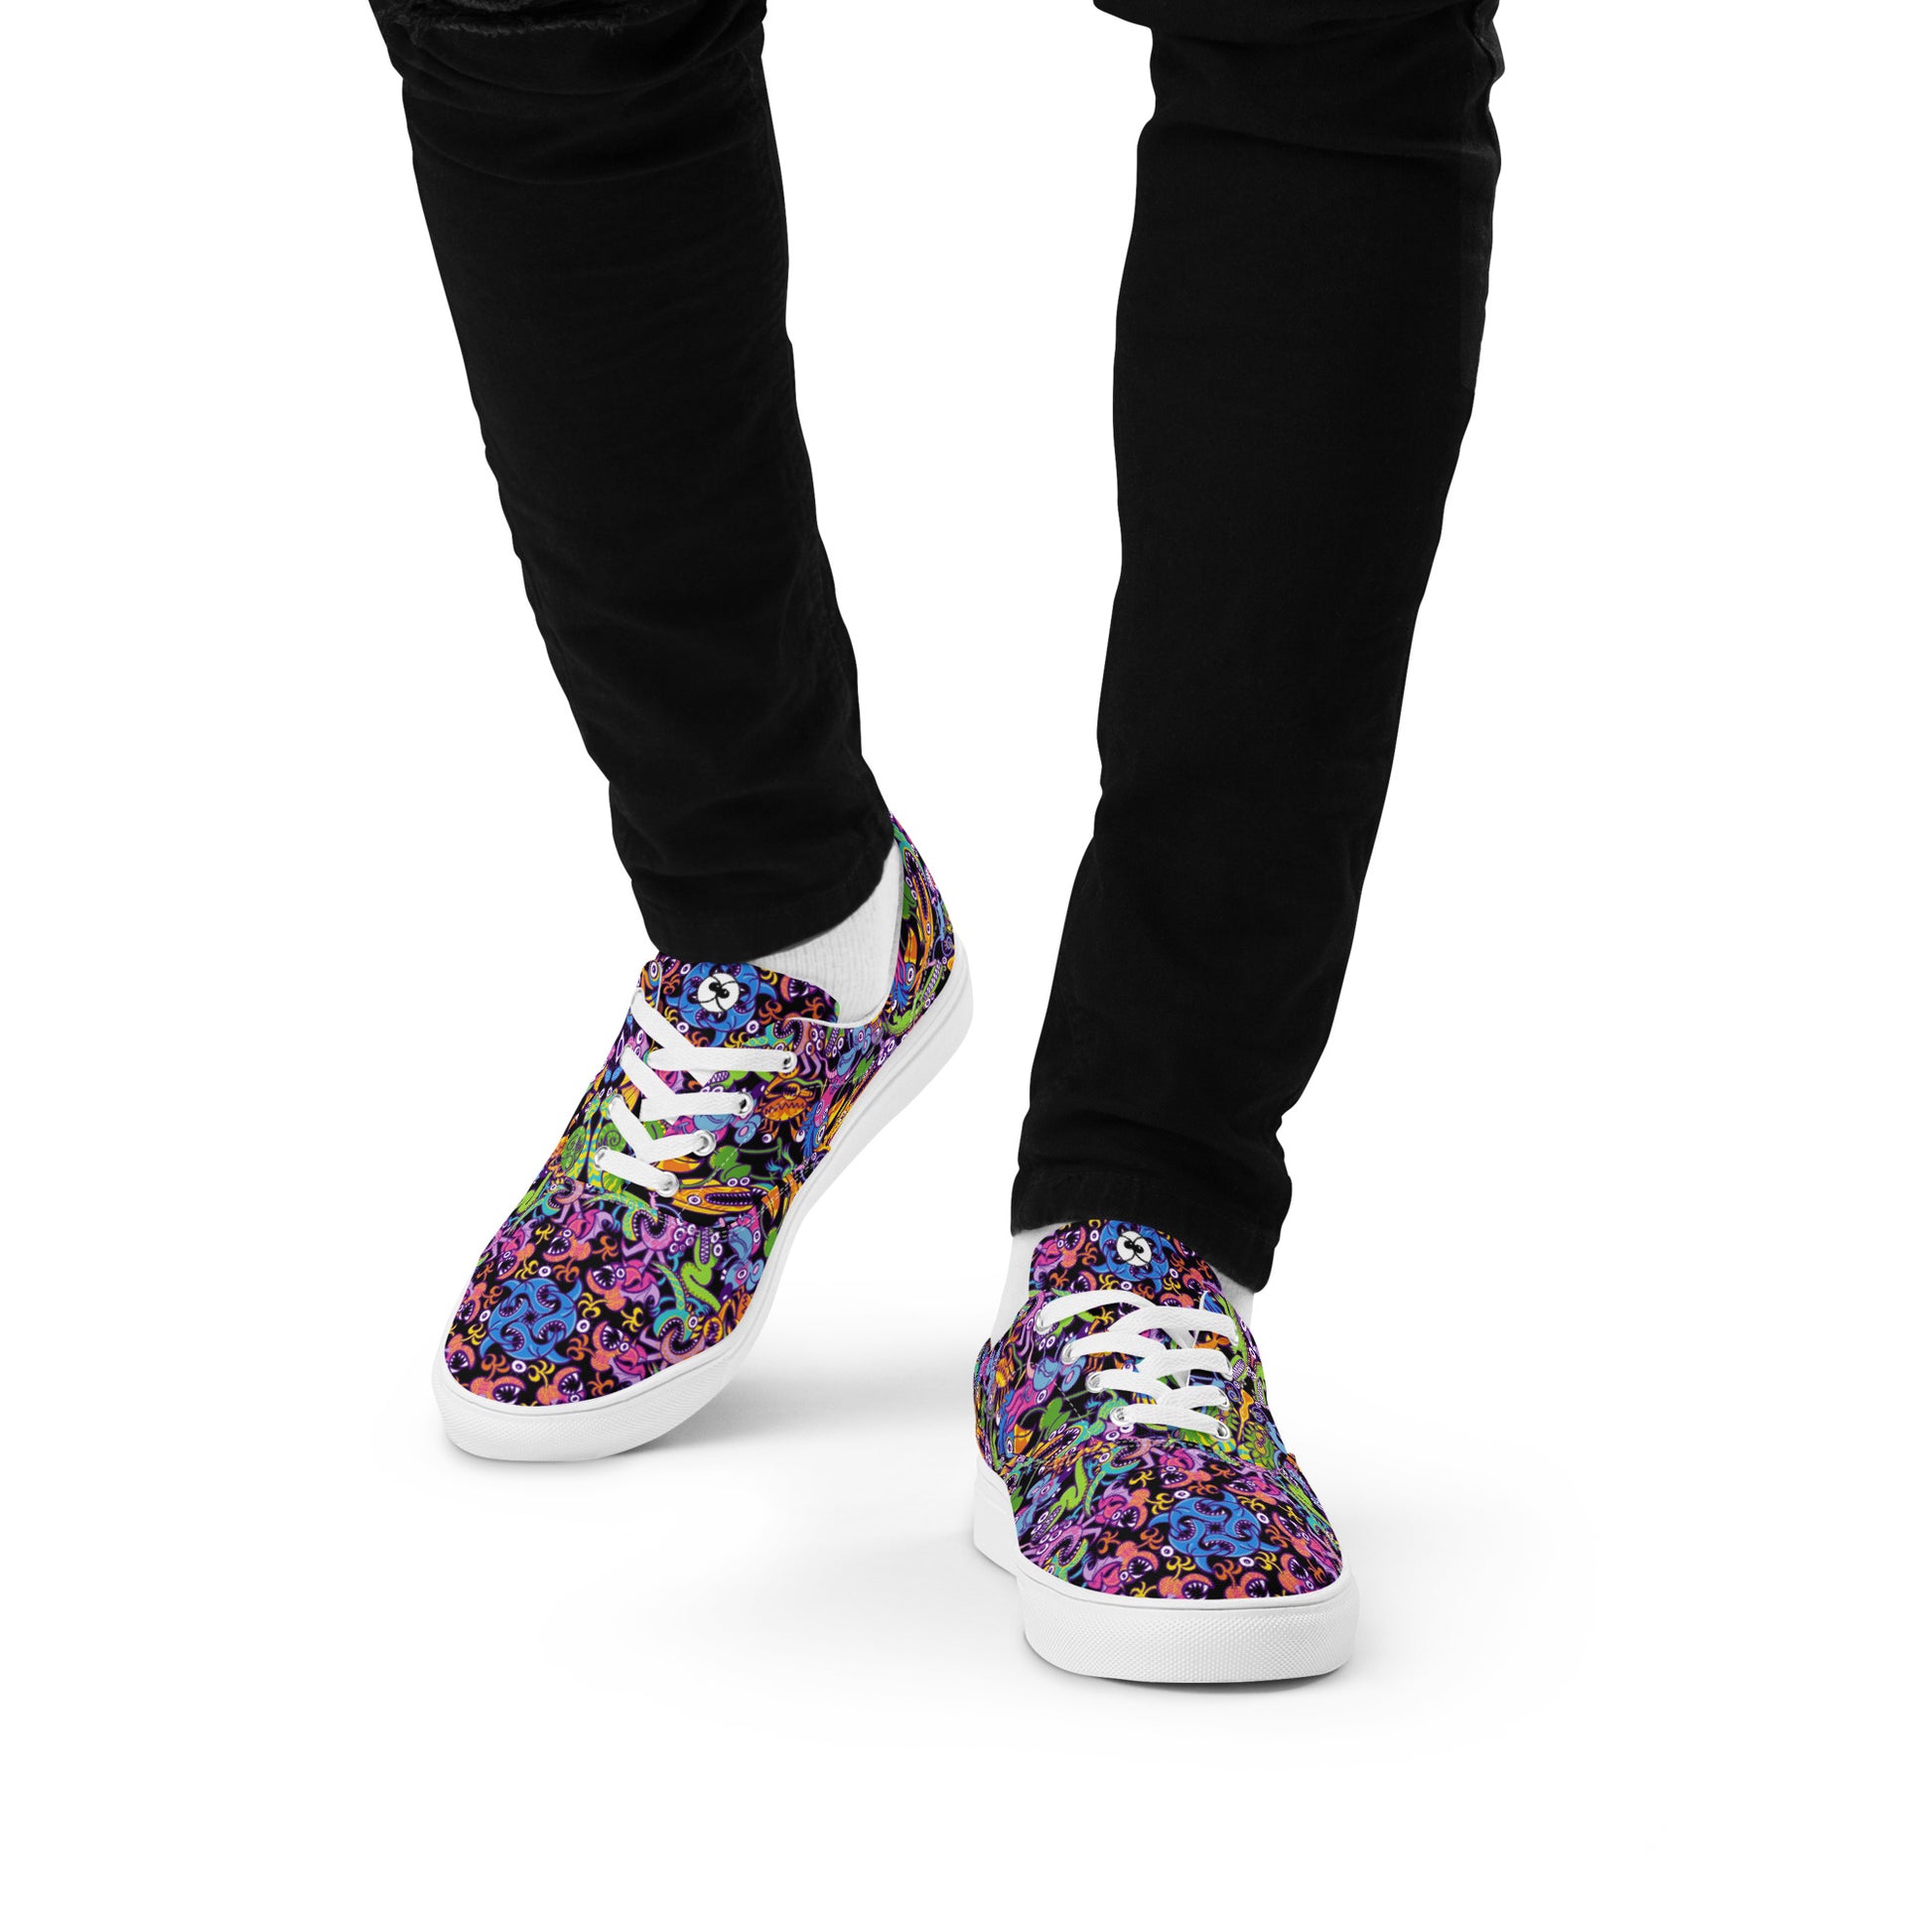 Eccentric critters in a lively crazy festival Men’s lace-up canvas shoes. Lifestyle